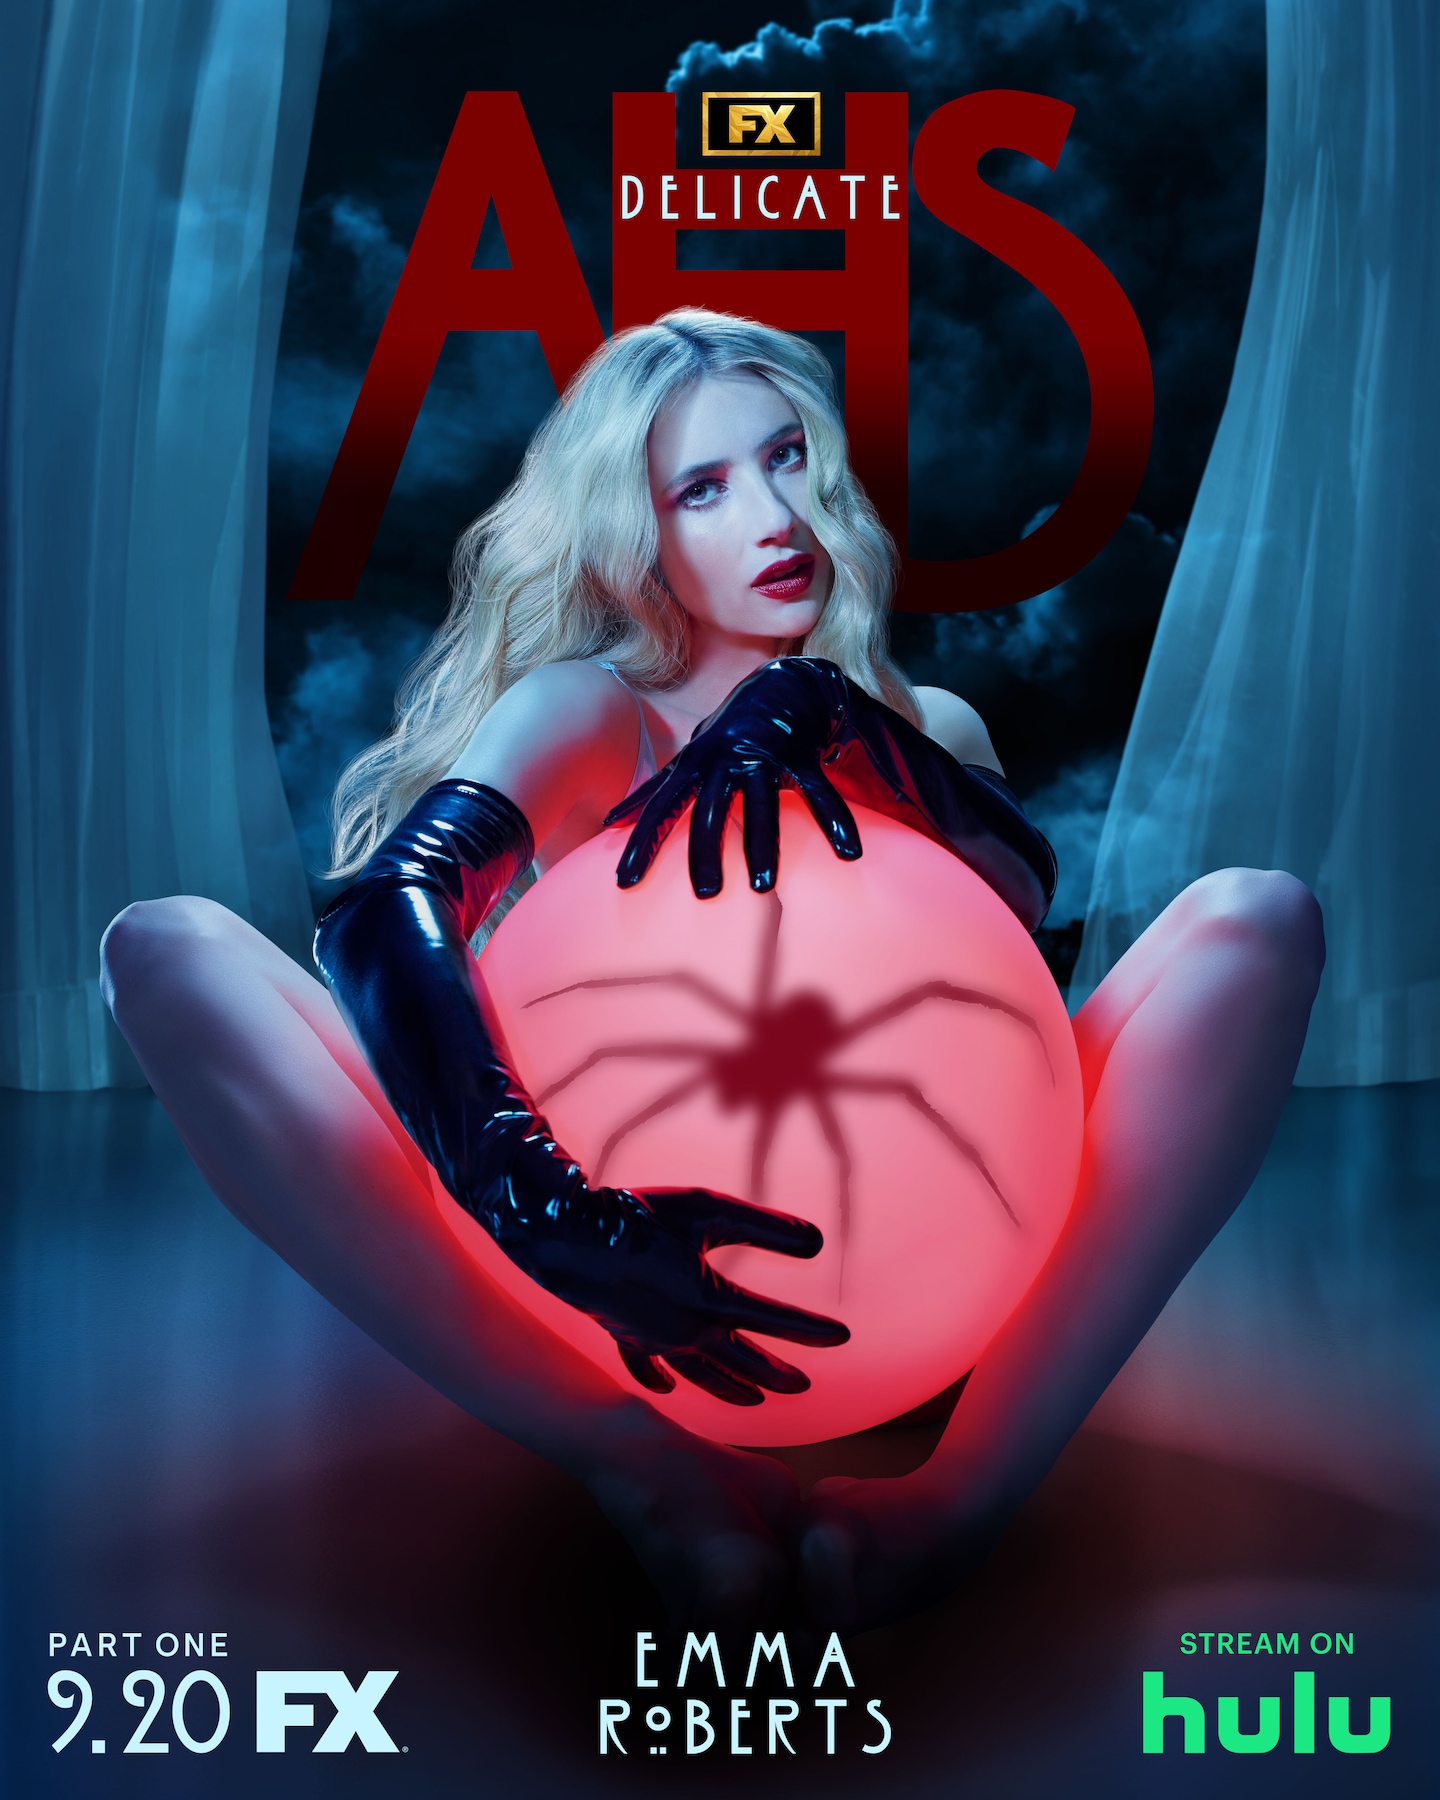 Blonde haired woman with long black leather gloves holds a red glowing orb with a spider inside for AHS: Delicate